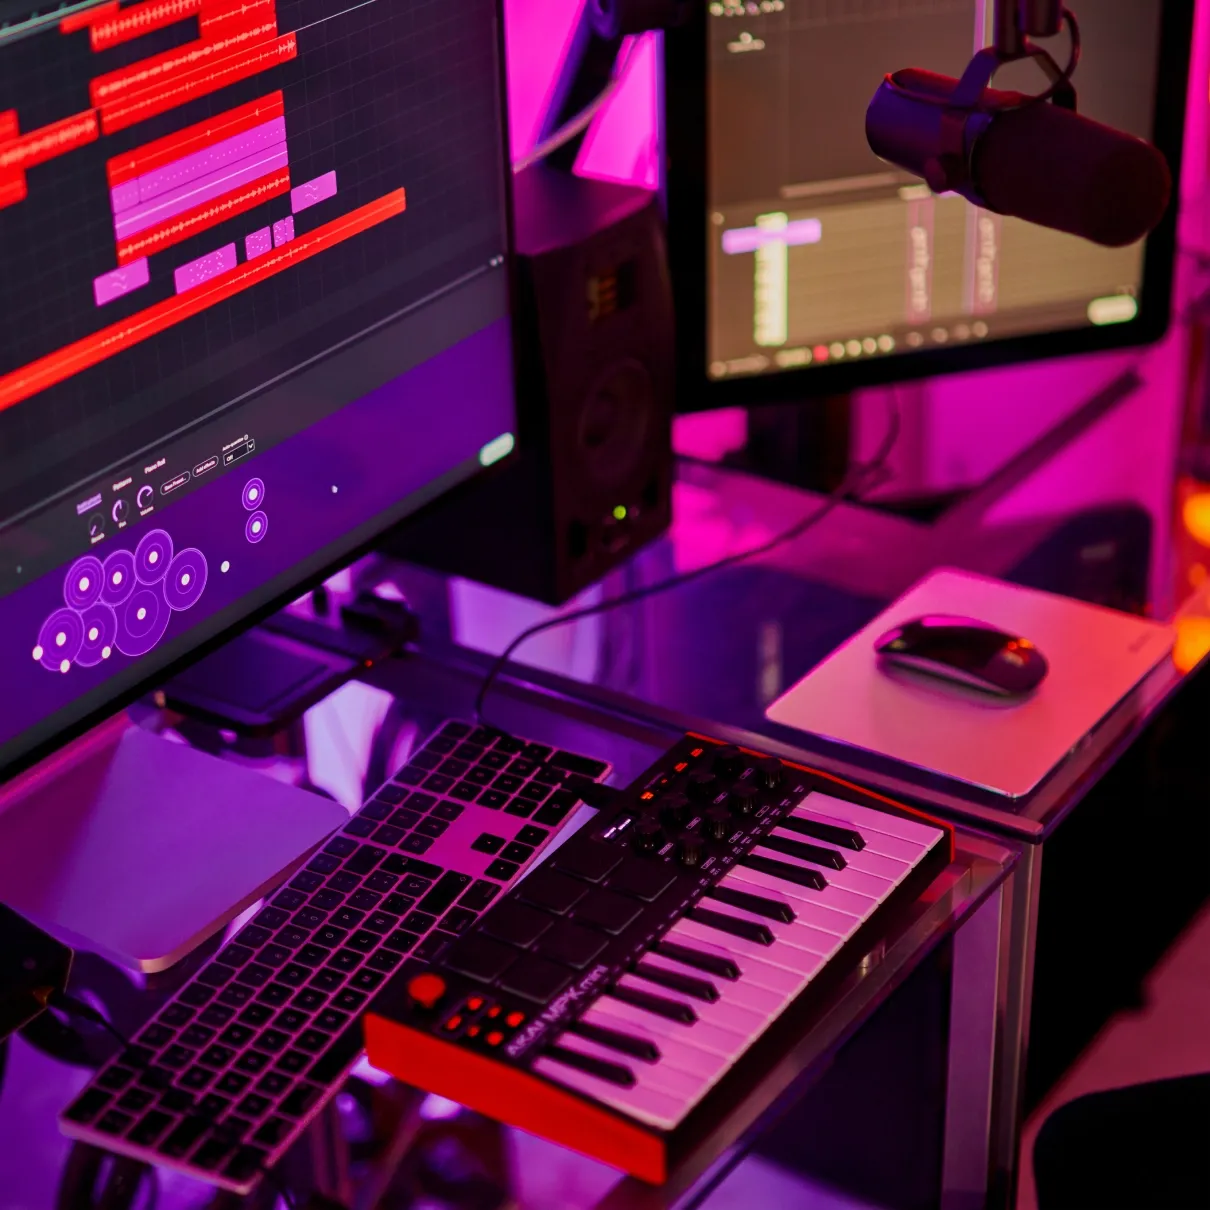 A closeup image of someone's home studio space. The computer keyboard, MIDI controller, computer mouse, and part of the computer screen are on a glass desk and in focus. The Soundtrap Studio is displayed in dark mode on the computer. The drum kit instrument is open in the studio.